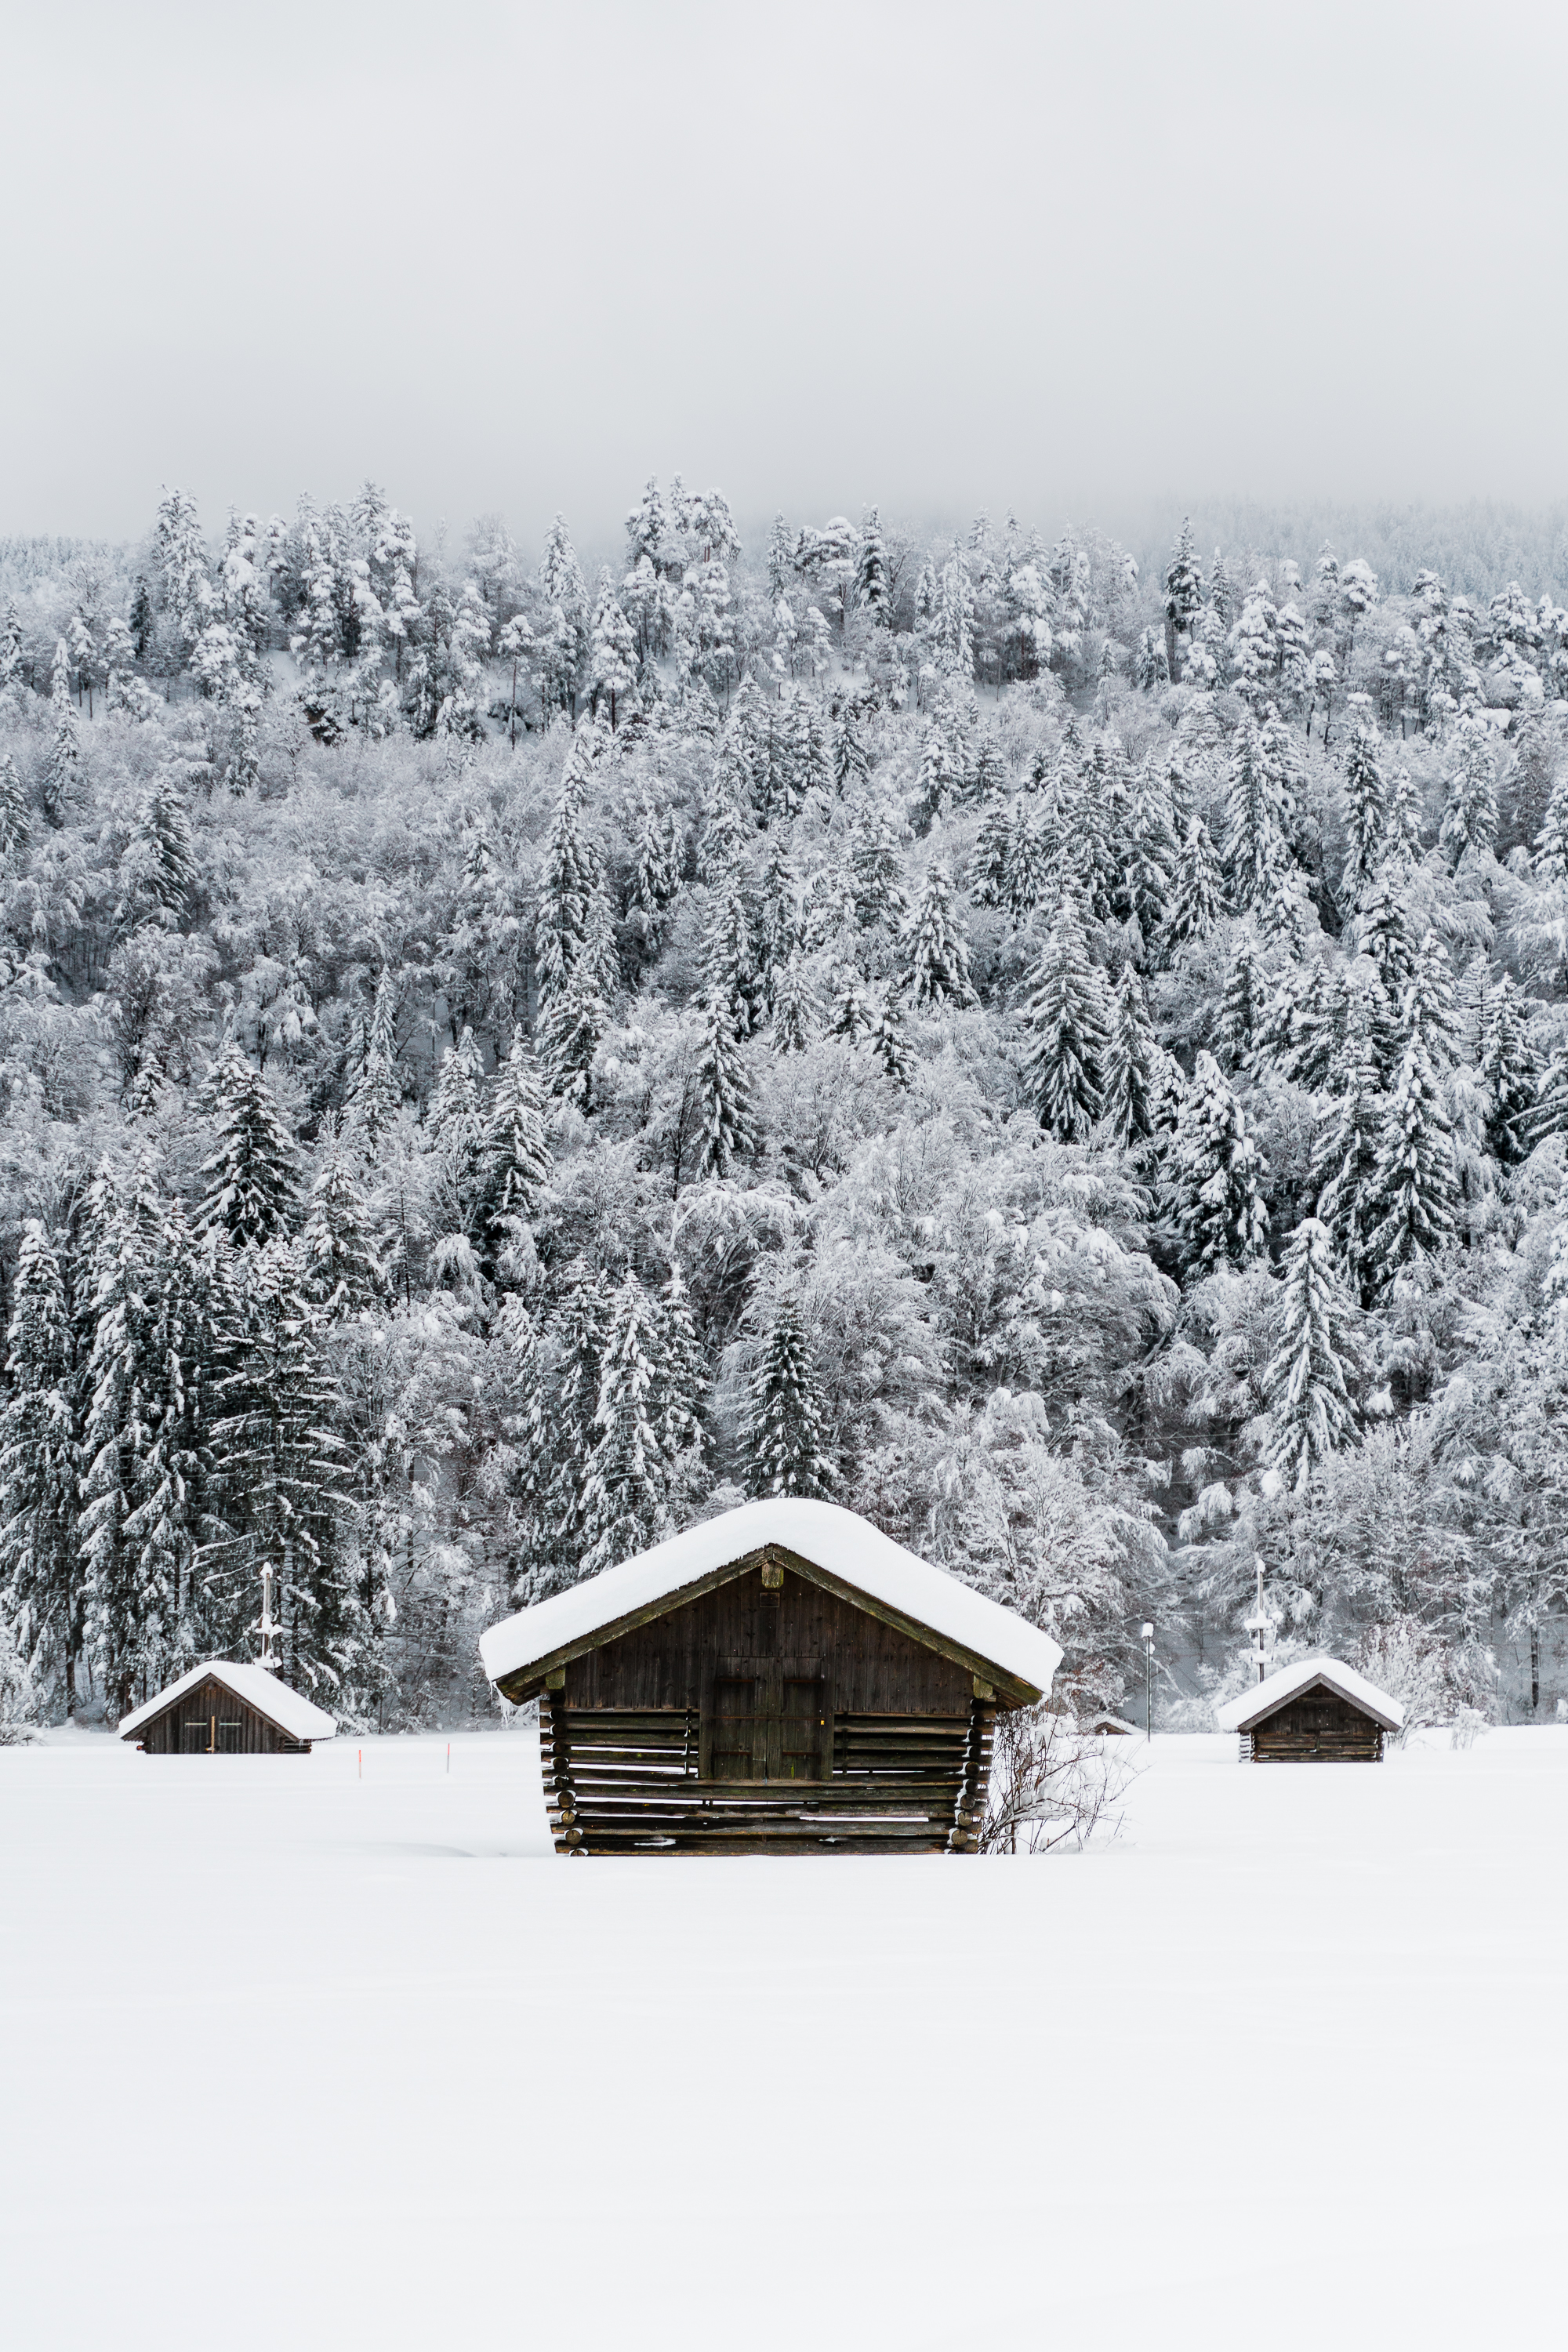 houses, winter, nature, snow, forest, small houses